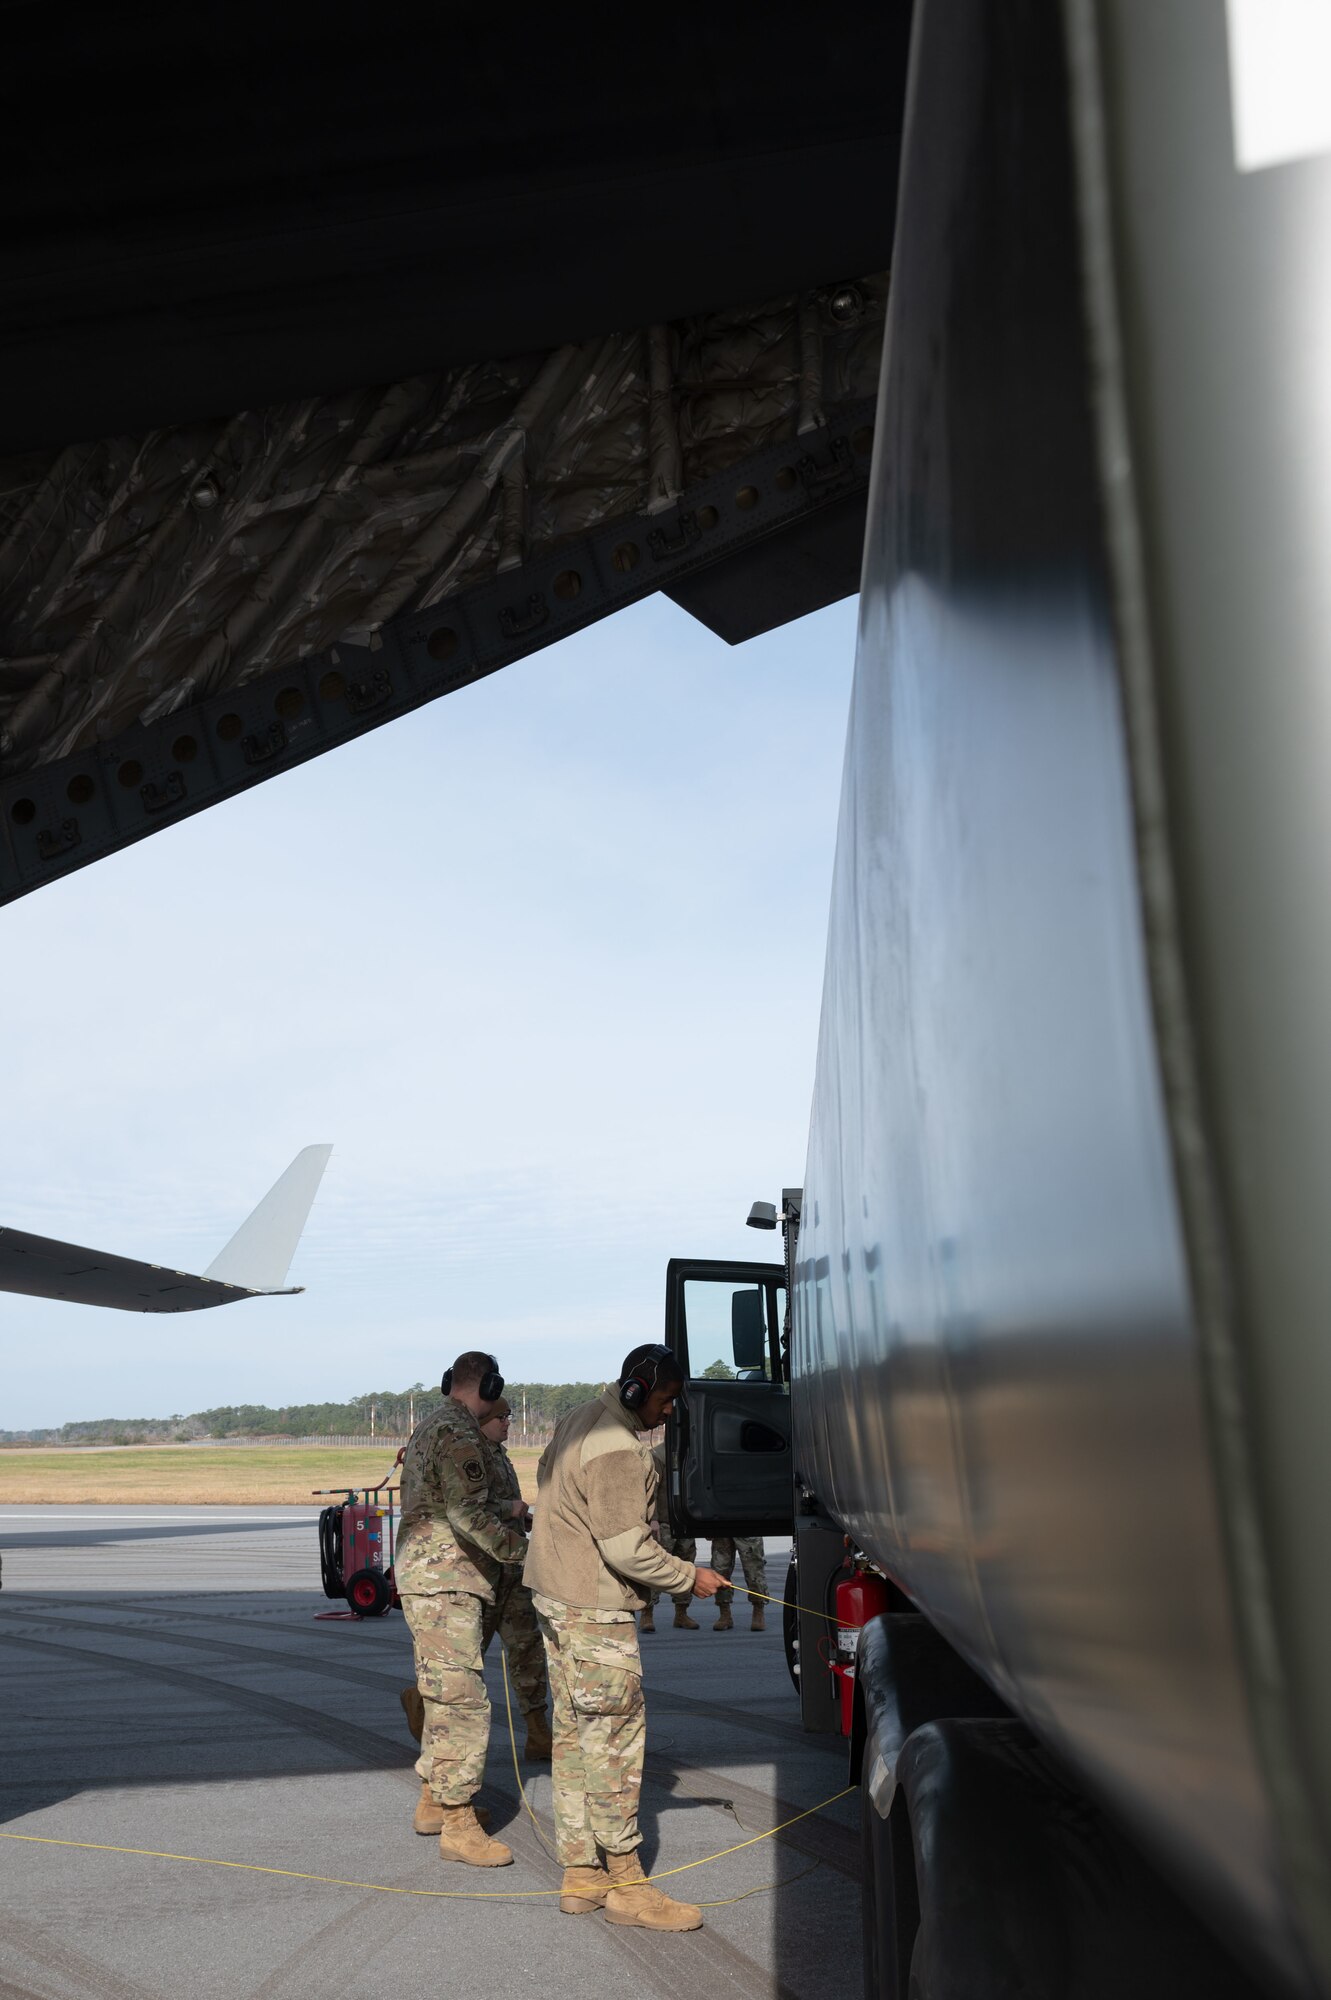 Members of the 4th Fighter Wing, from Seymour Johnson Air Force Base North Carolina, prepare to refuel a C-17 Globemaster III at Marine Corps Air Station Cherry Point, N.C., Dec. 14, 2022. An integrated combat turn exercise is the use of military personnel and equipment to rapidly refuel and rearm aircraft. (U.S. Air Force photo by Airman 1st Class Rebecca Sirimarco-Lang)